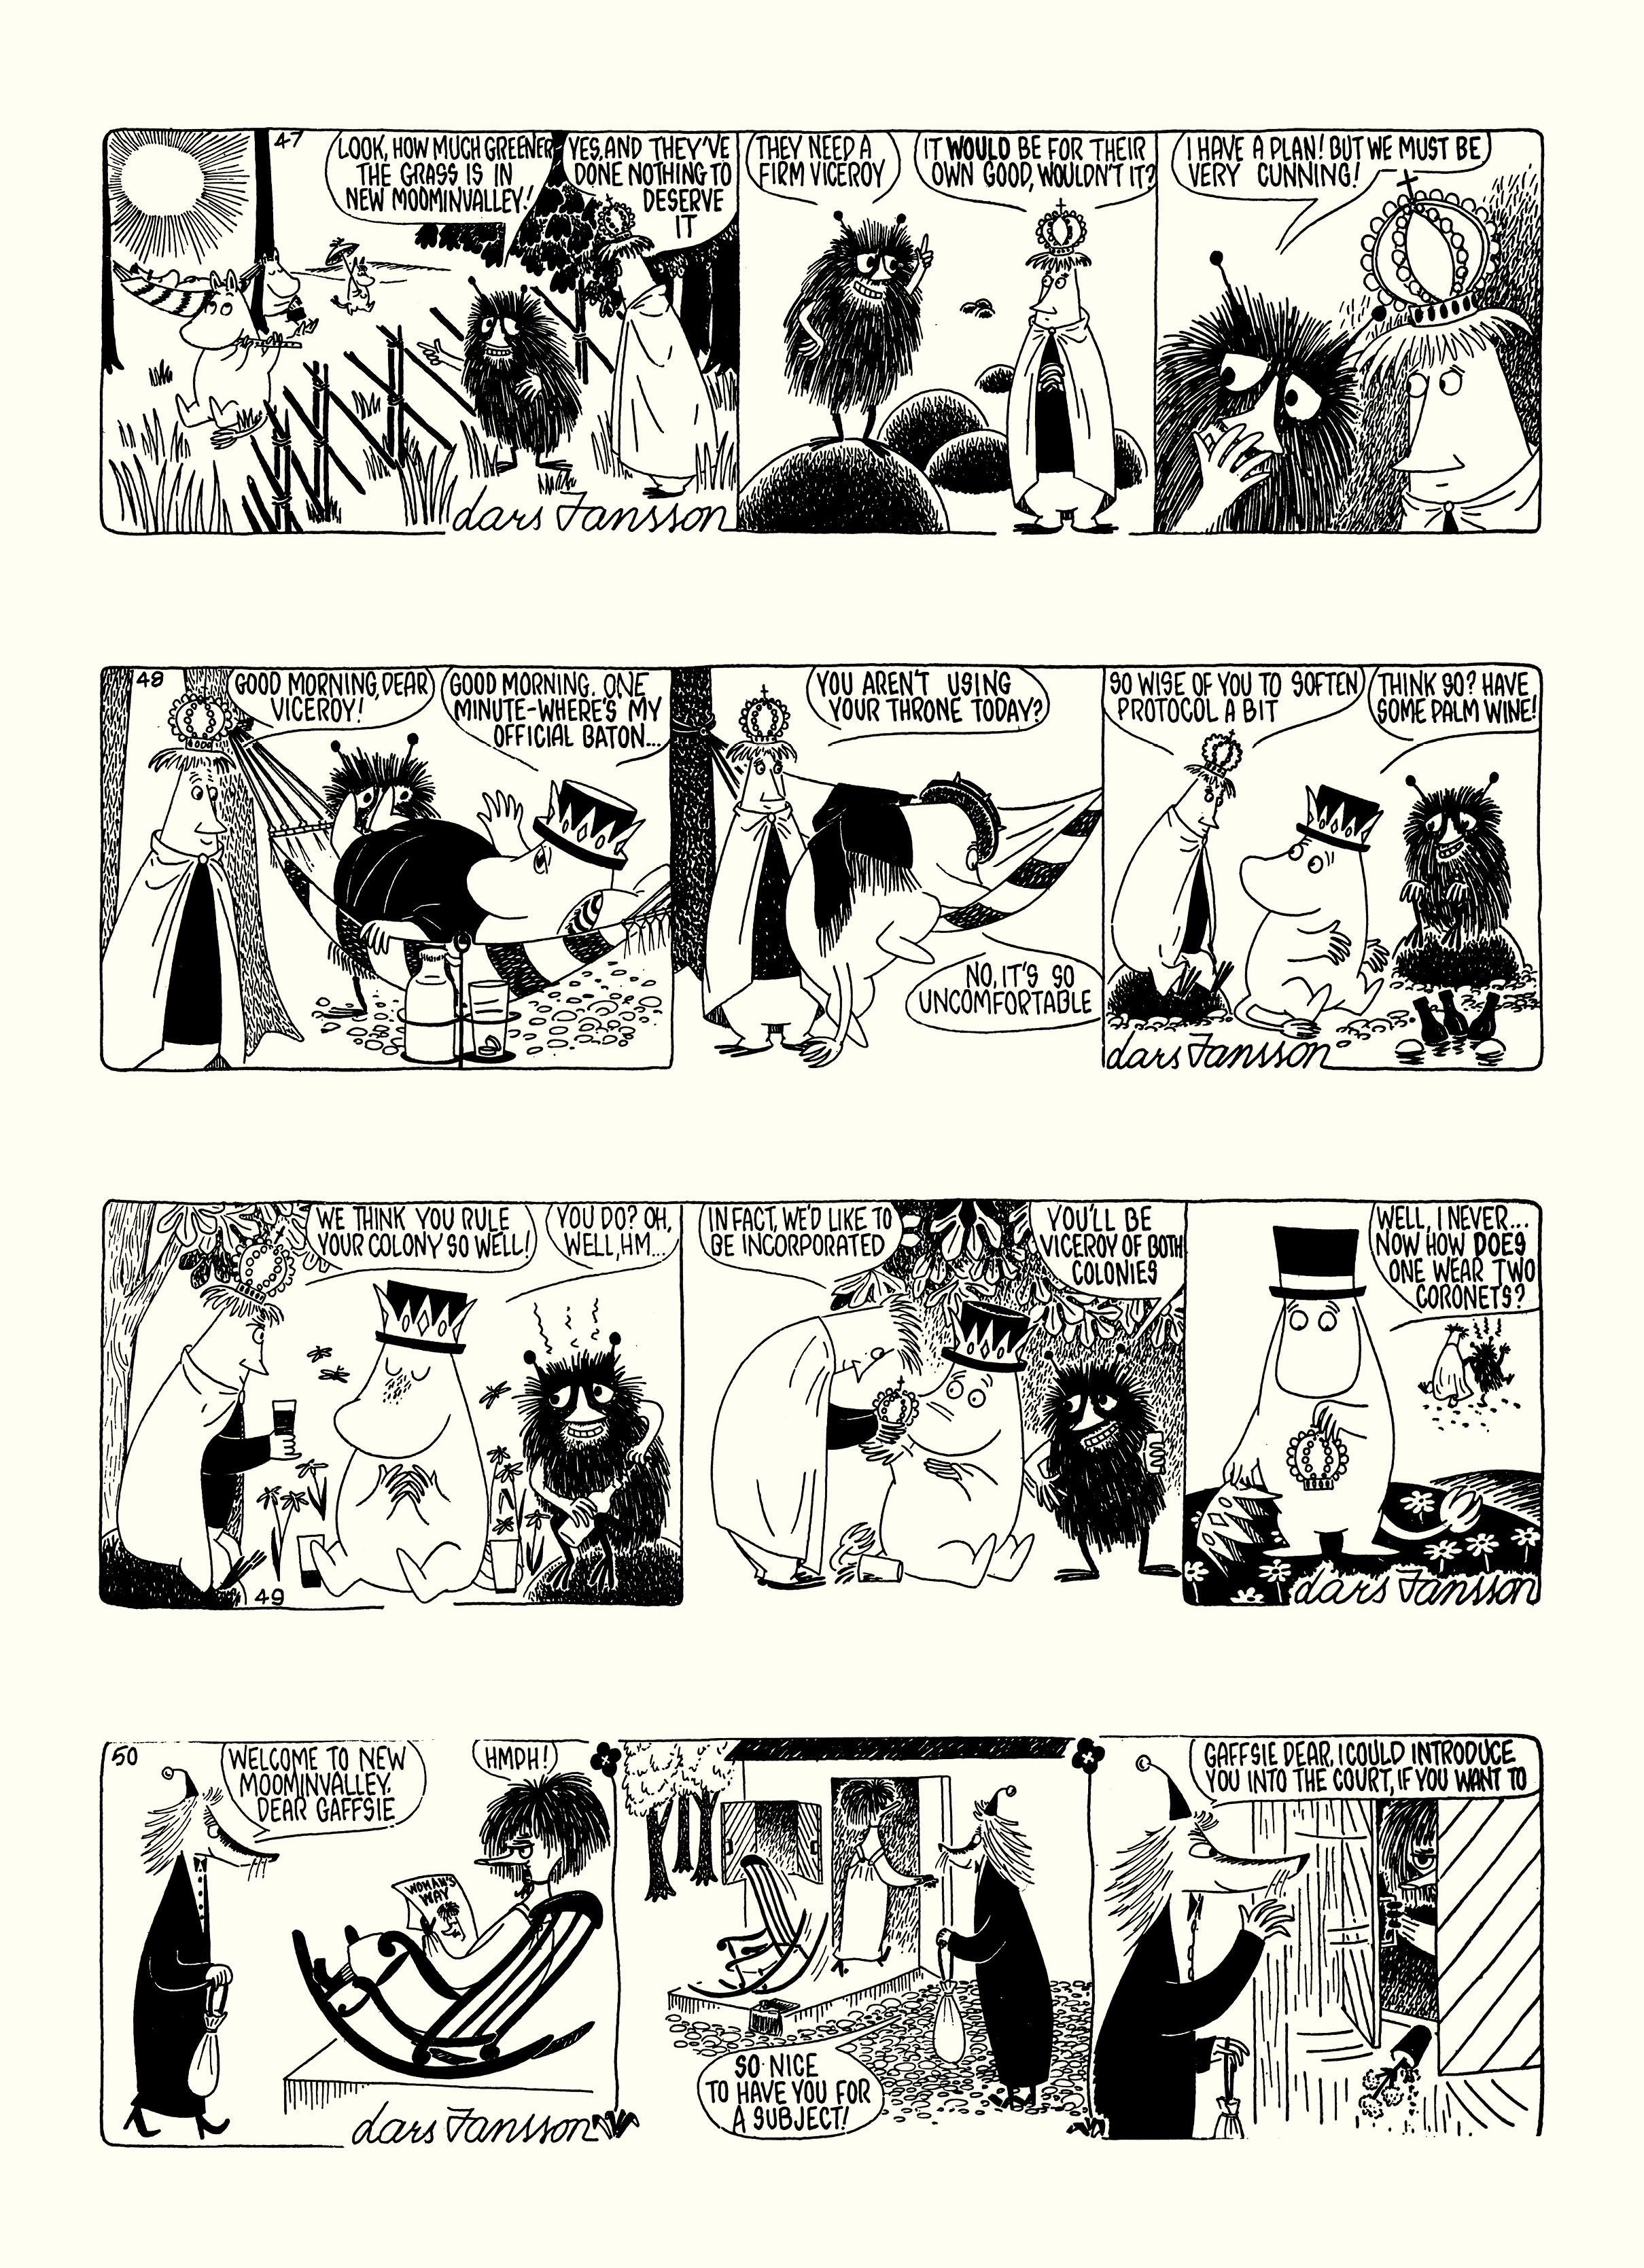 Read online Moomin: The Complete Lars Jansson Comic Strip comic -  Issue # TPB 7 - 18